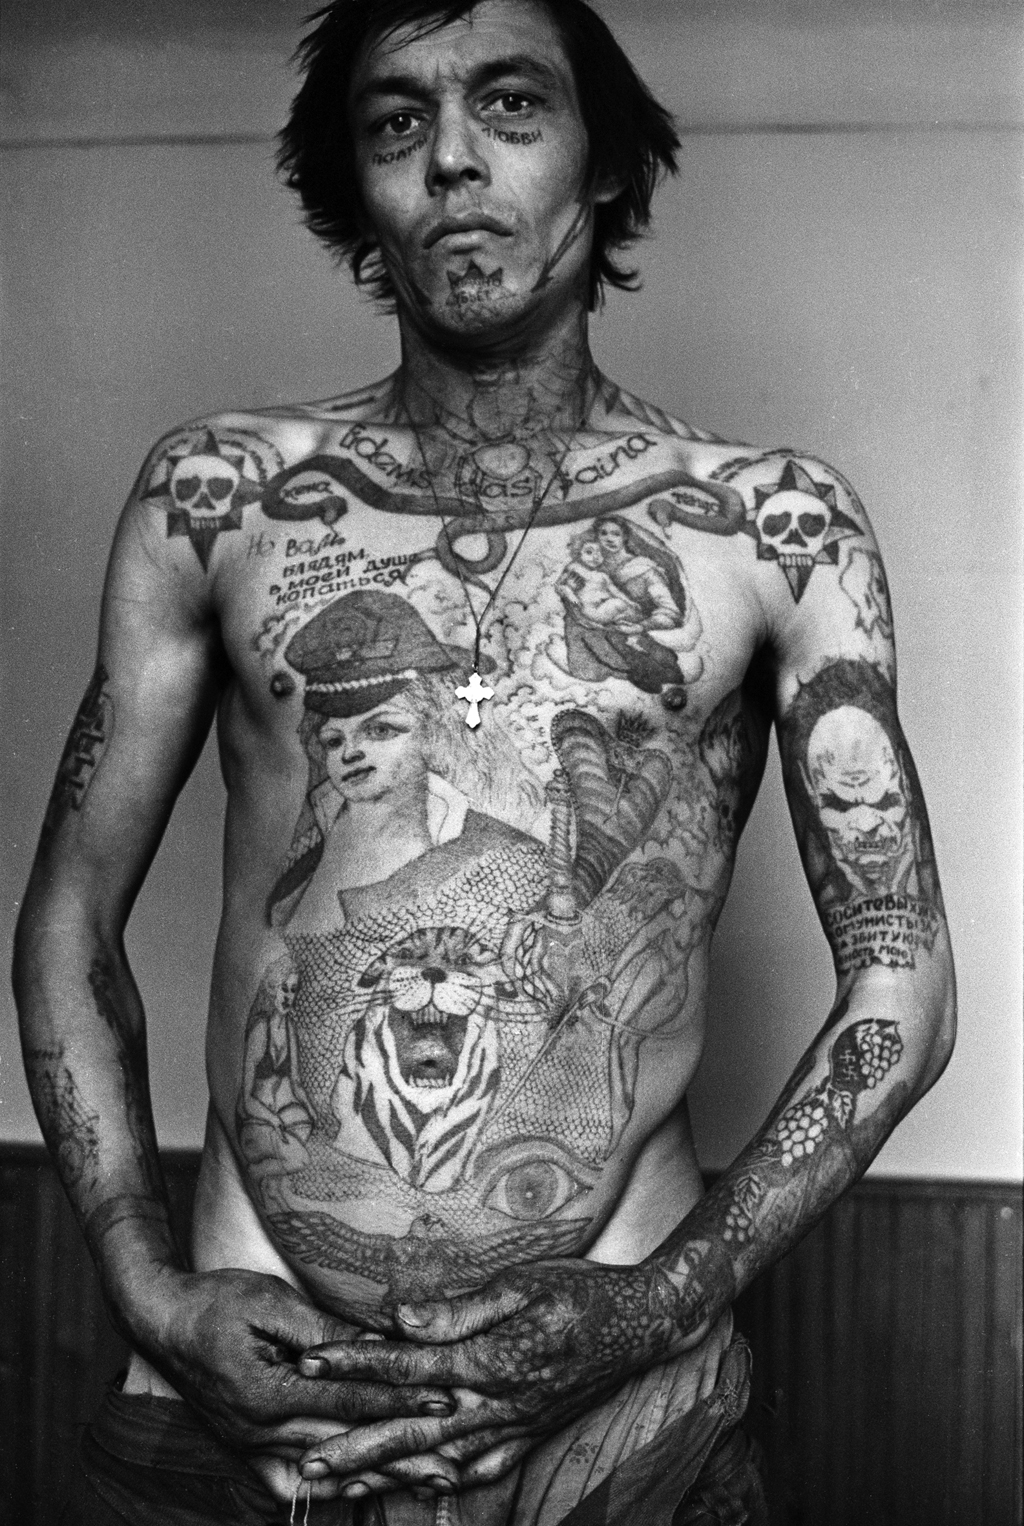 This prisoner’s tattoos signify that he feels angry and bitter with communist power (‘Communists, Suck My Dick for My Ruined Youth’). The tattoos on the face signify that he never expects to go free. the words underneath his eyes read: 'Full of Love'. He works as a stoker.